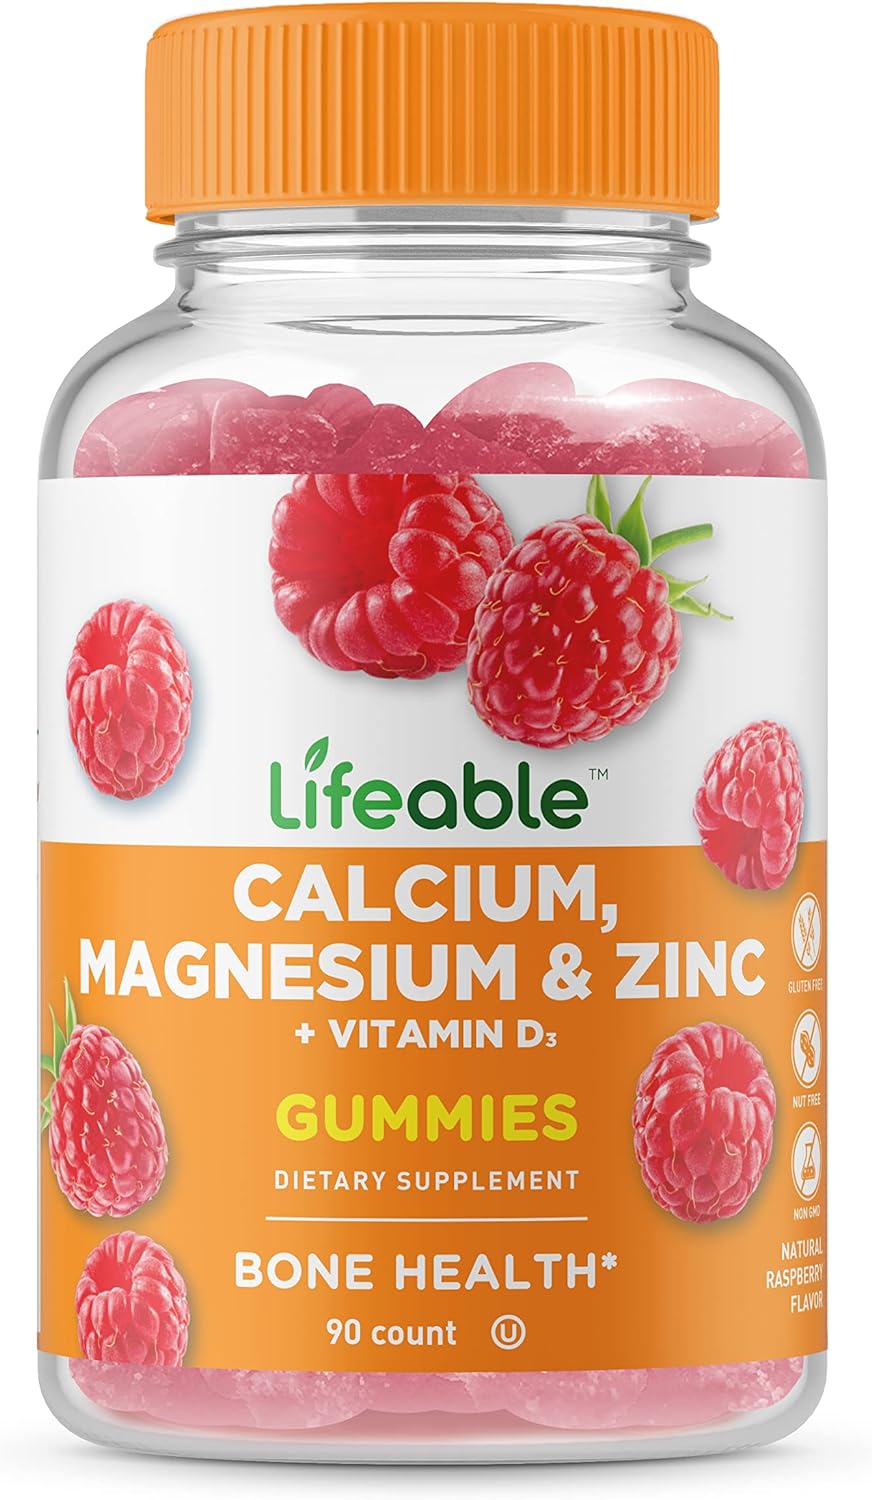 Lifeable Calcium, Magnesium, Zinc and Vitamin D Gummies - Great Tasting Natural Flavor Vitamin Supplements - Gluten Free GMO Free Chewable - for Bone Health - for Adults, Man, Women - 90 Gummies